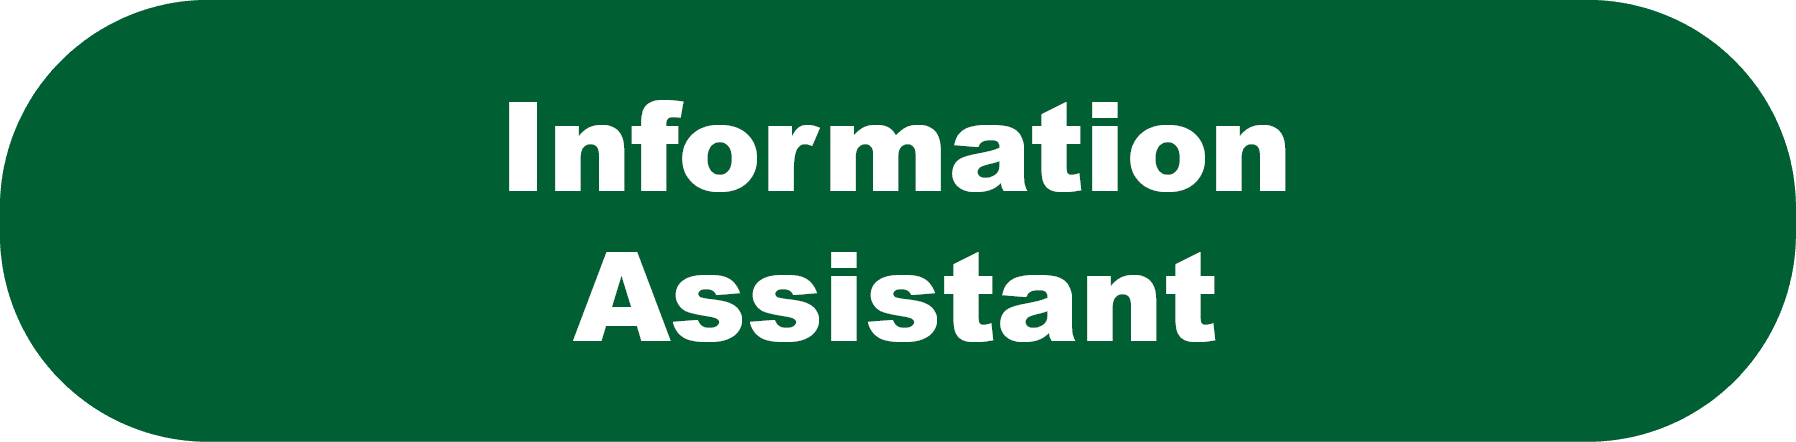 Information Assistant